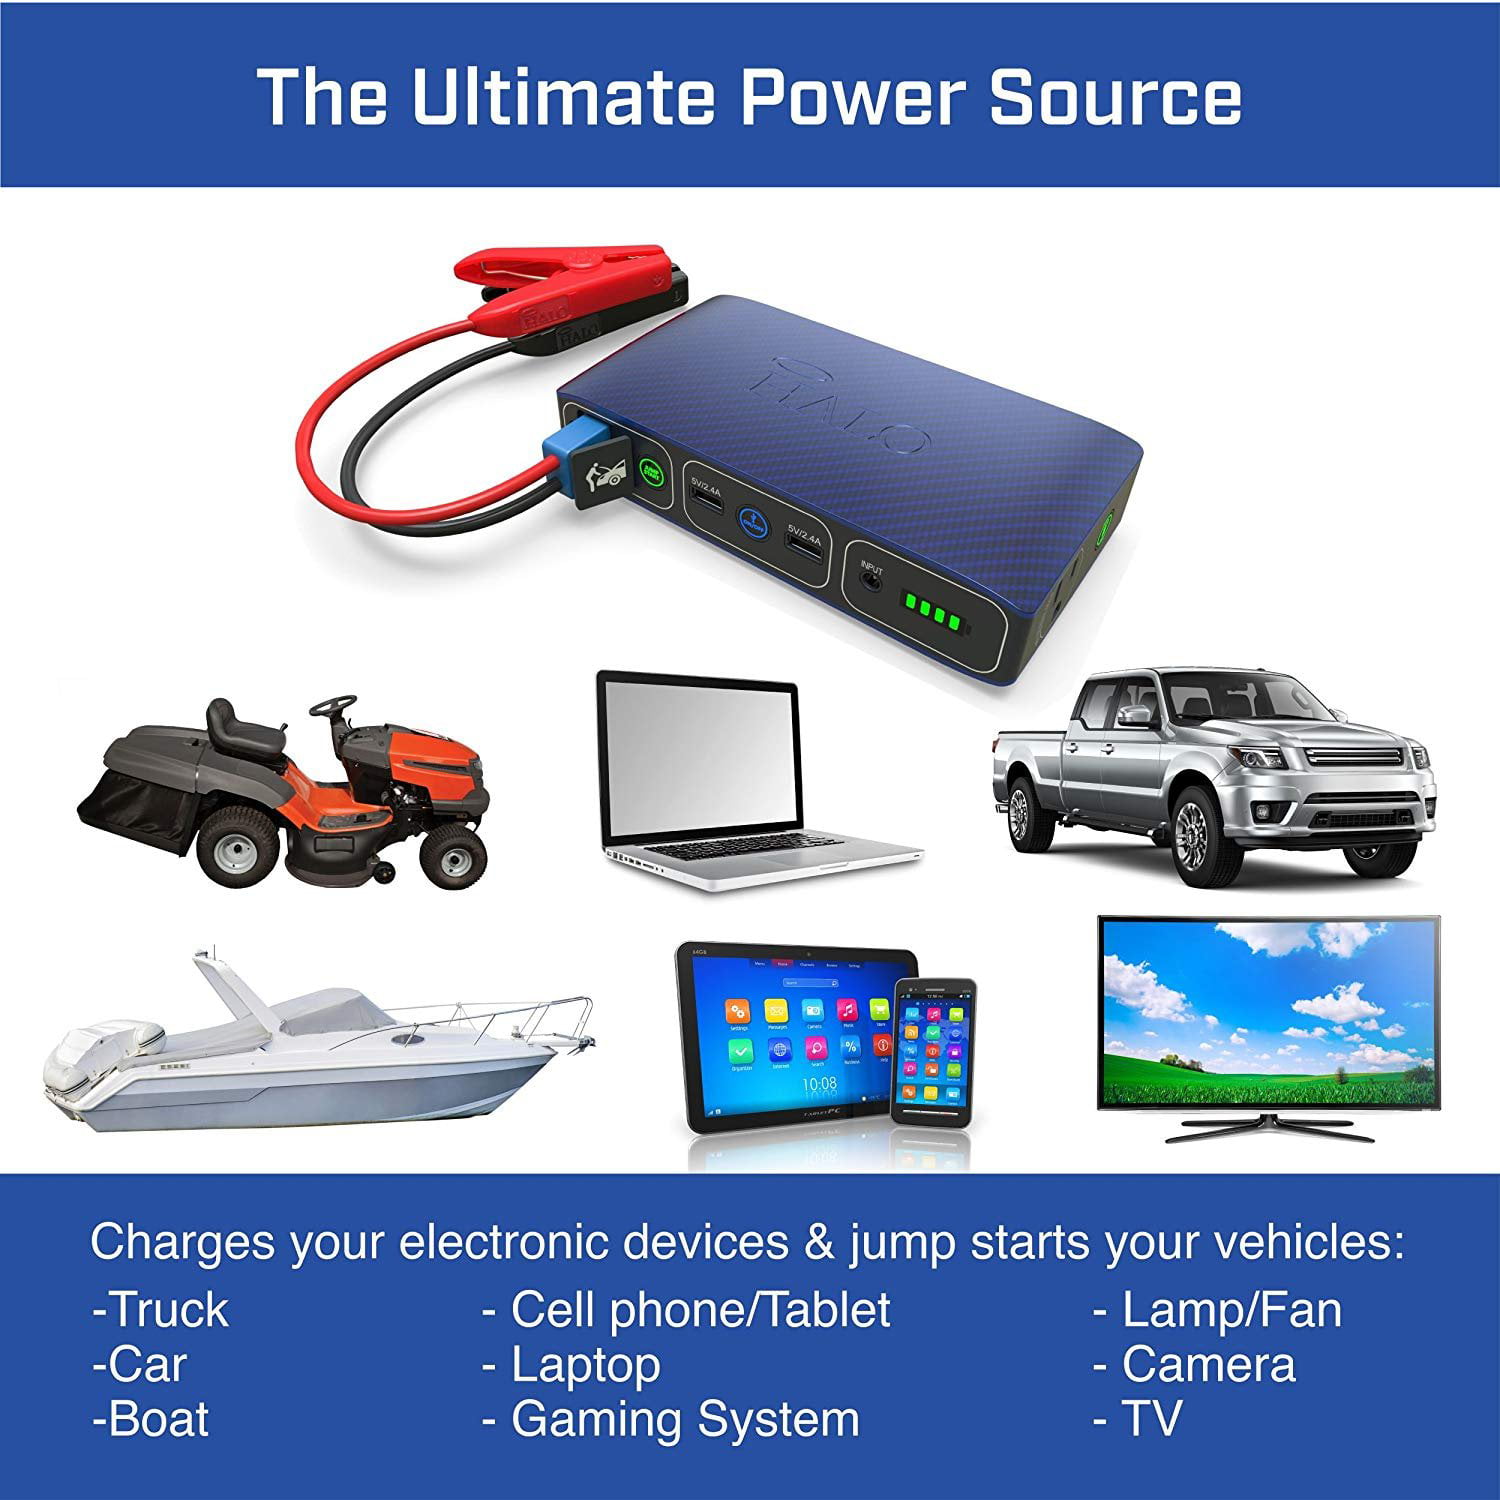 HALO Bolt 58830 mWh Portable Phone Laptop Charger Car Jump Starter with AC  Outlet and Car Charger - Blue Graphite